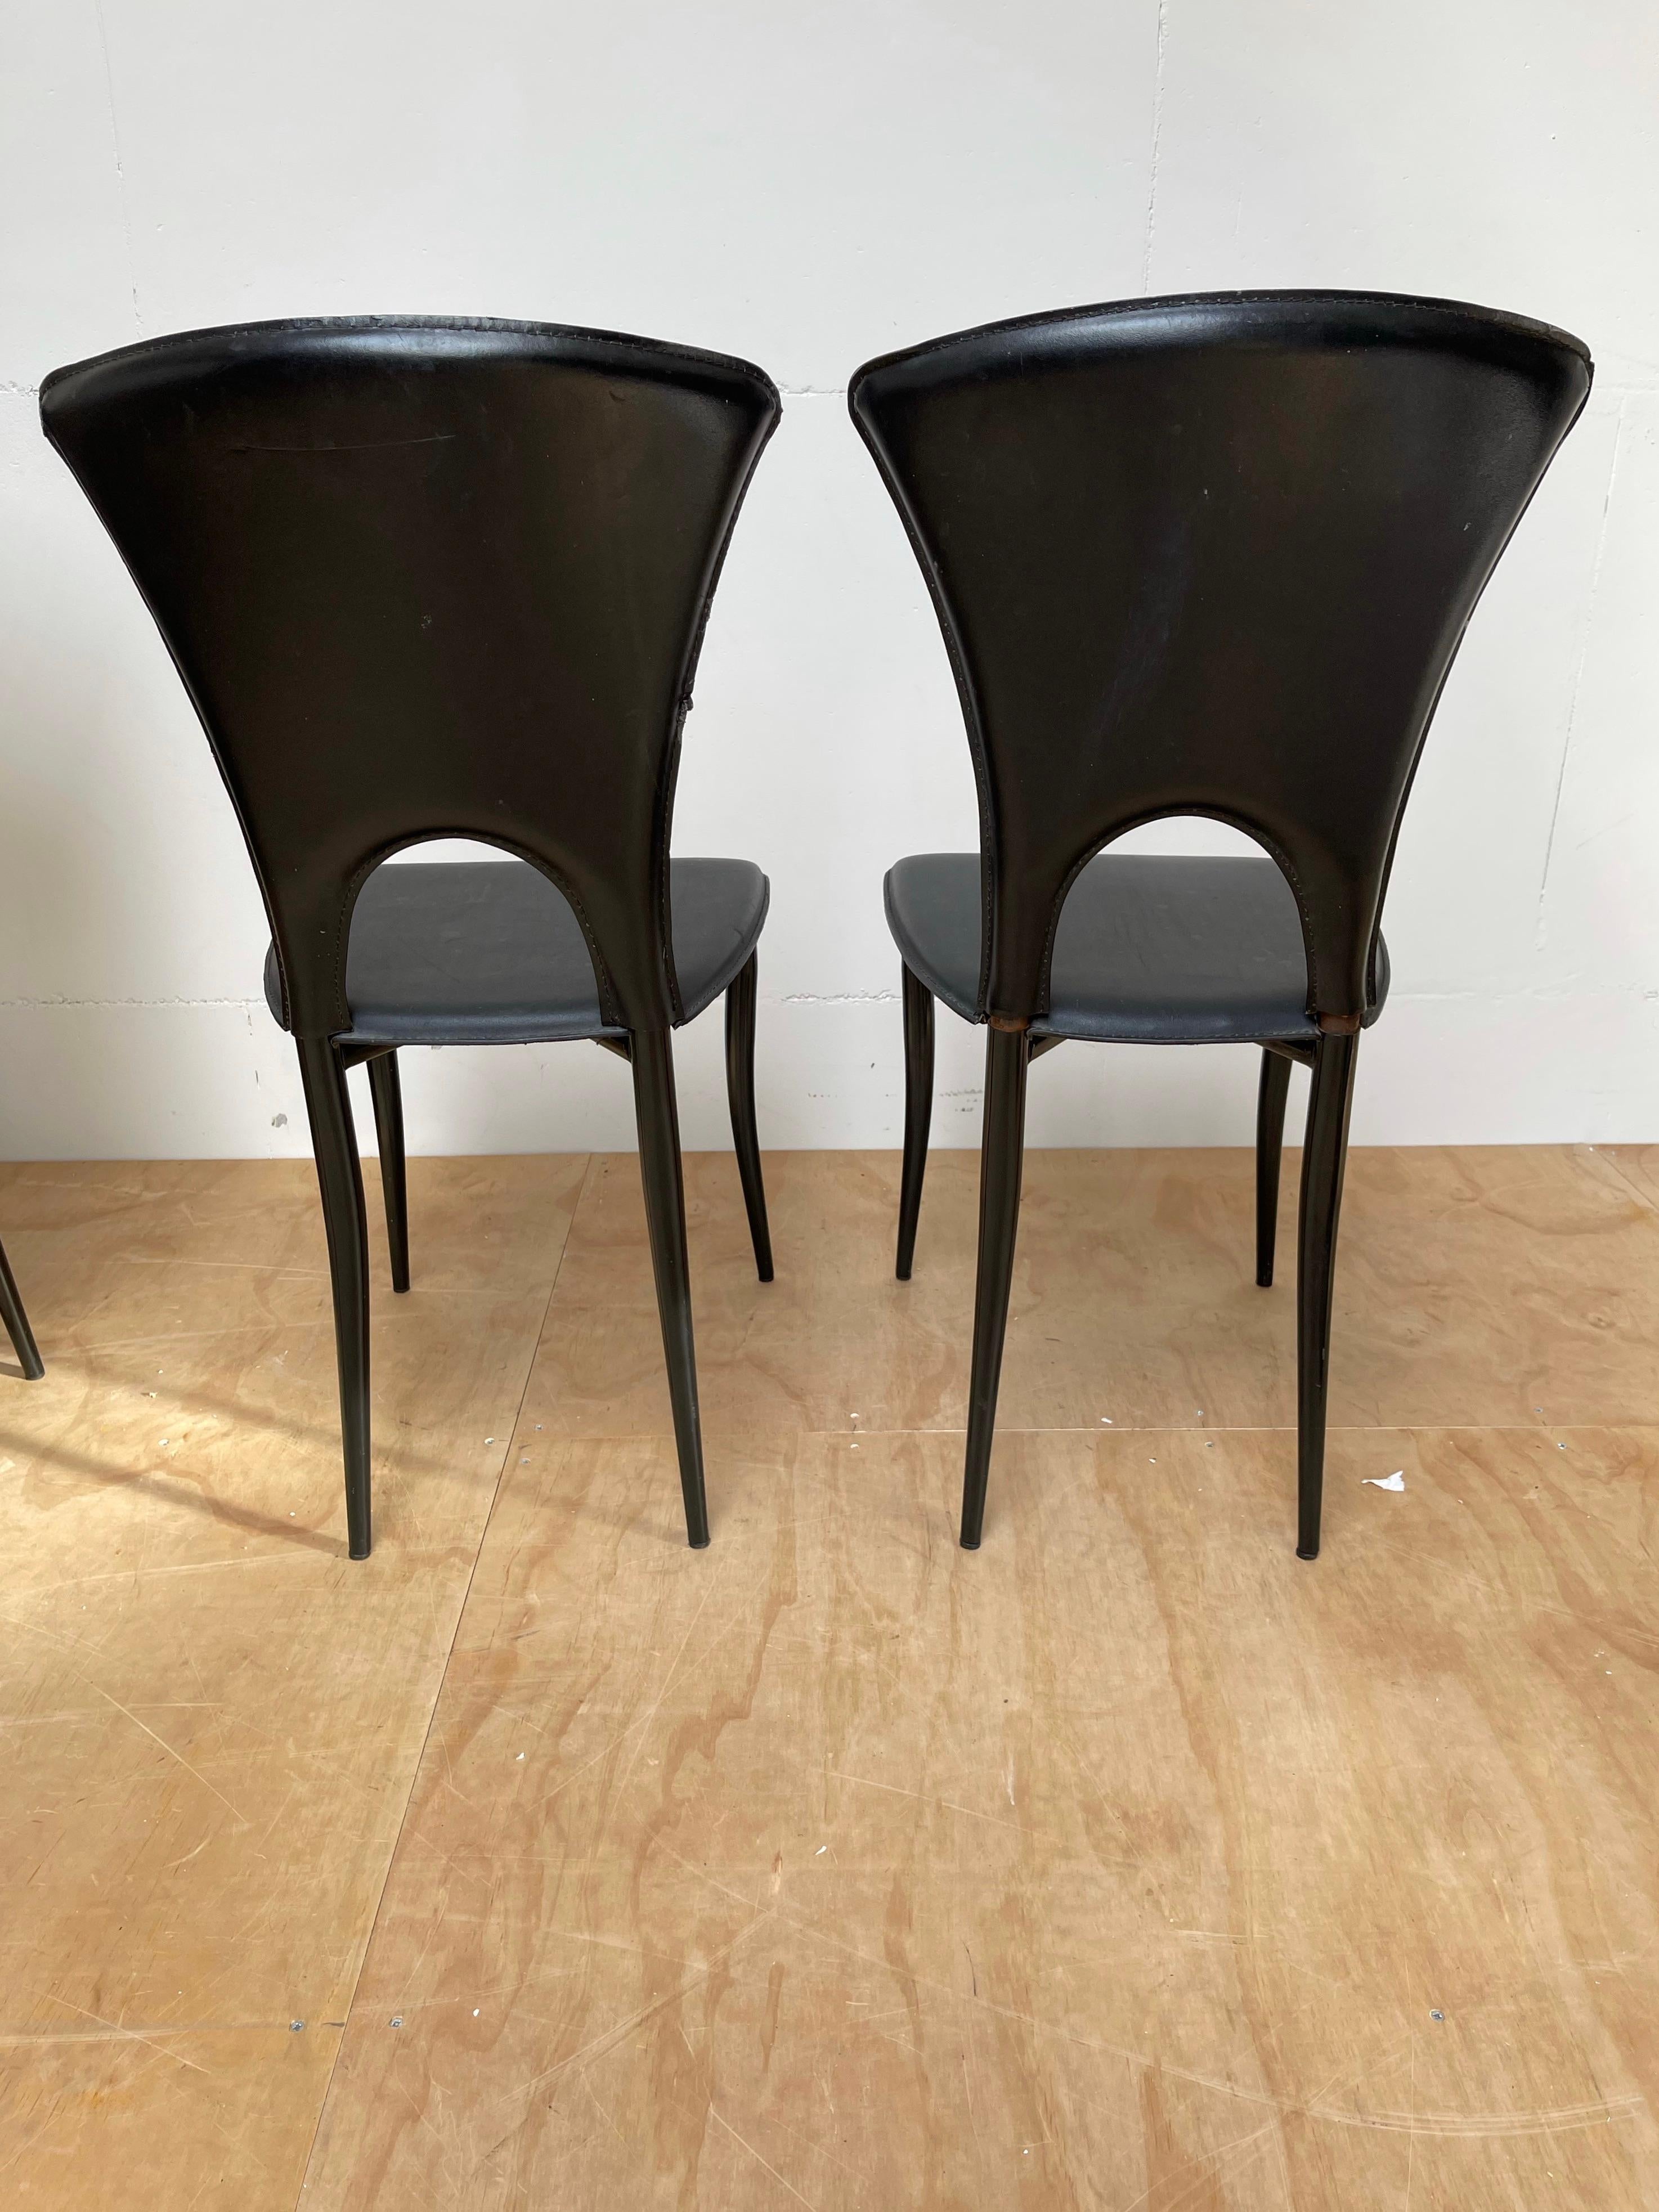 Italian Design Mid-Century Modern Set of 4 Dining Chairs w. Black Leather Seats For Sale 10